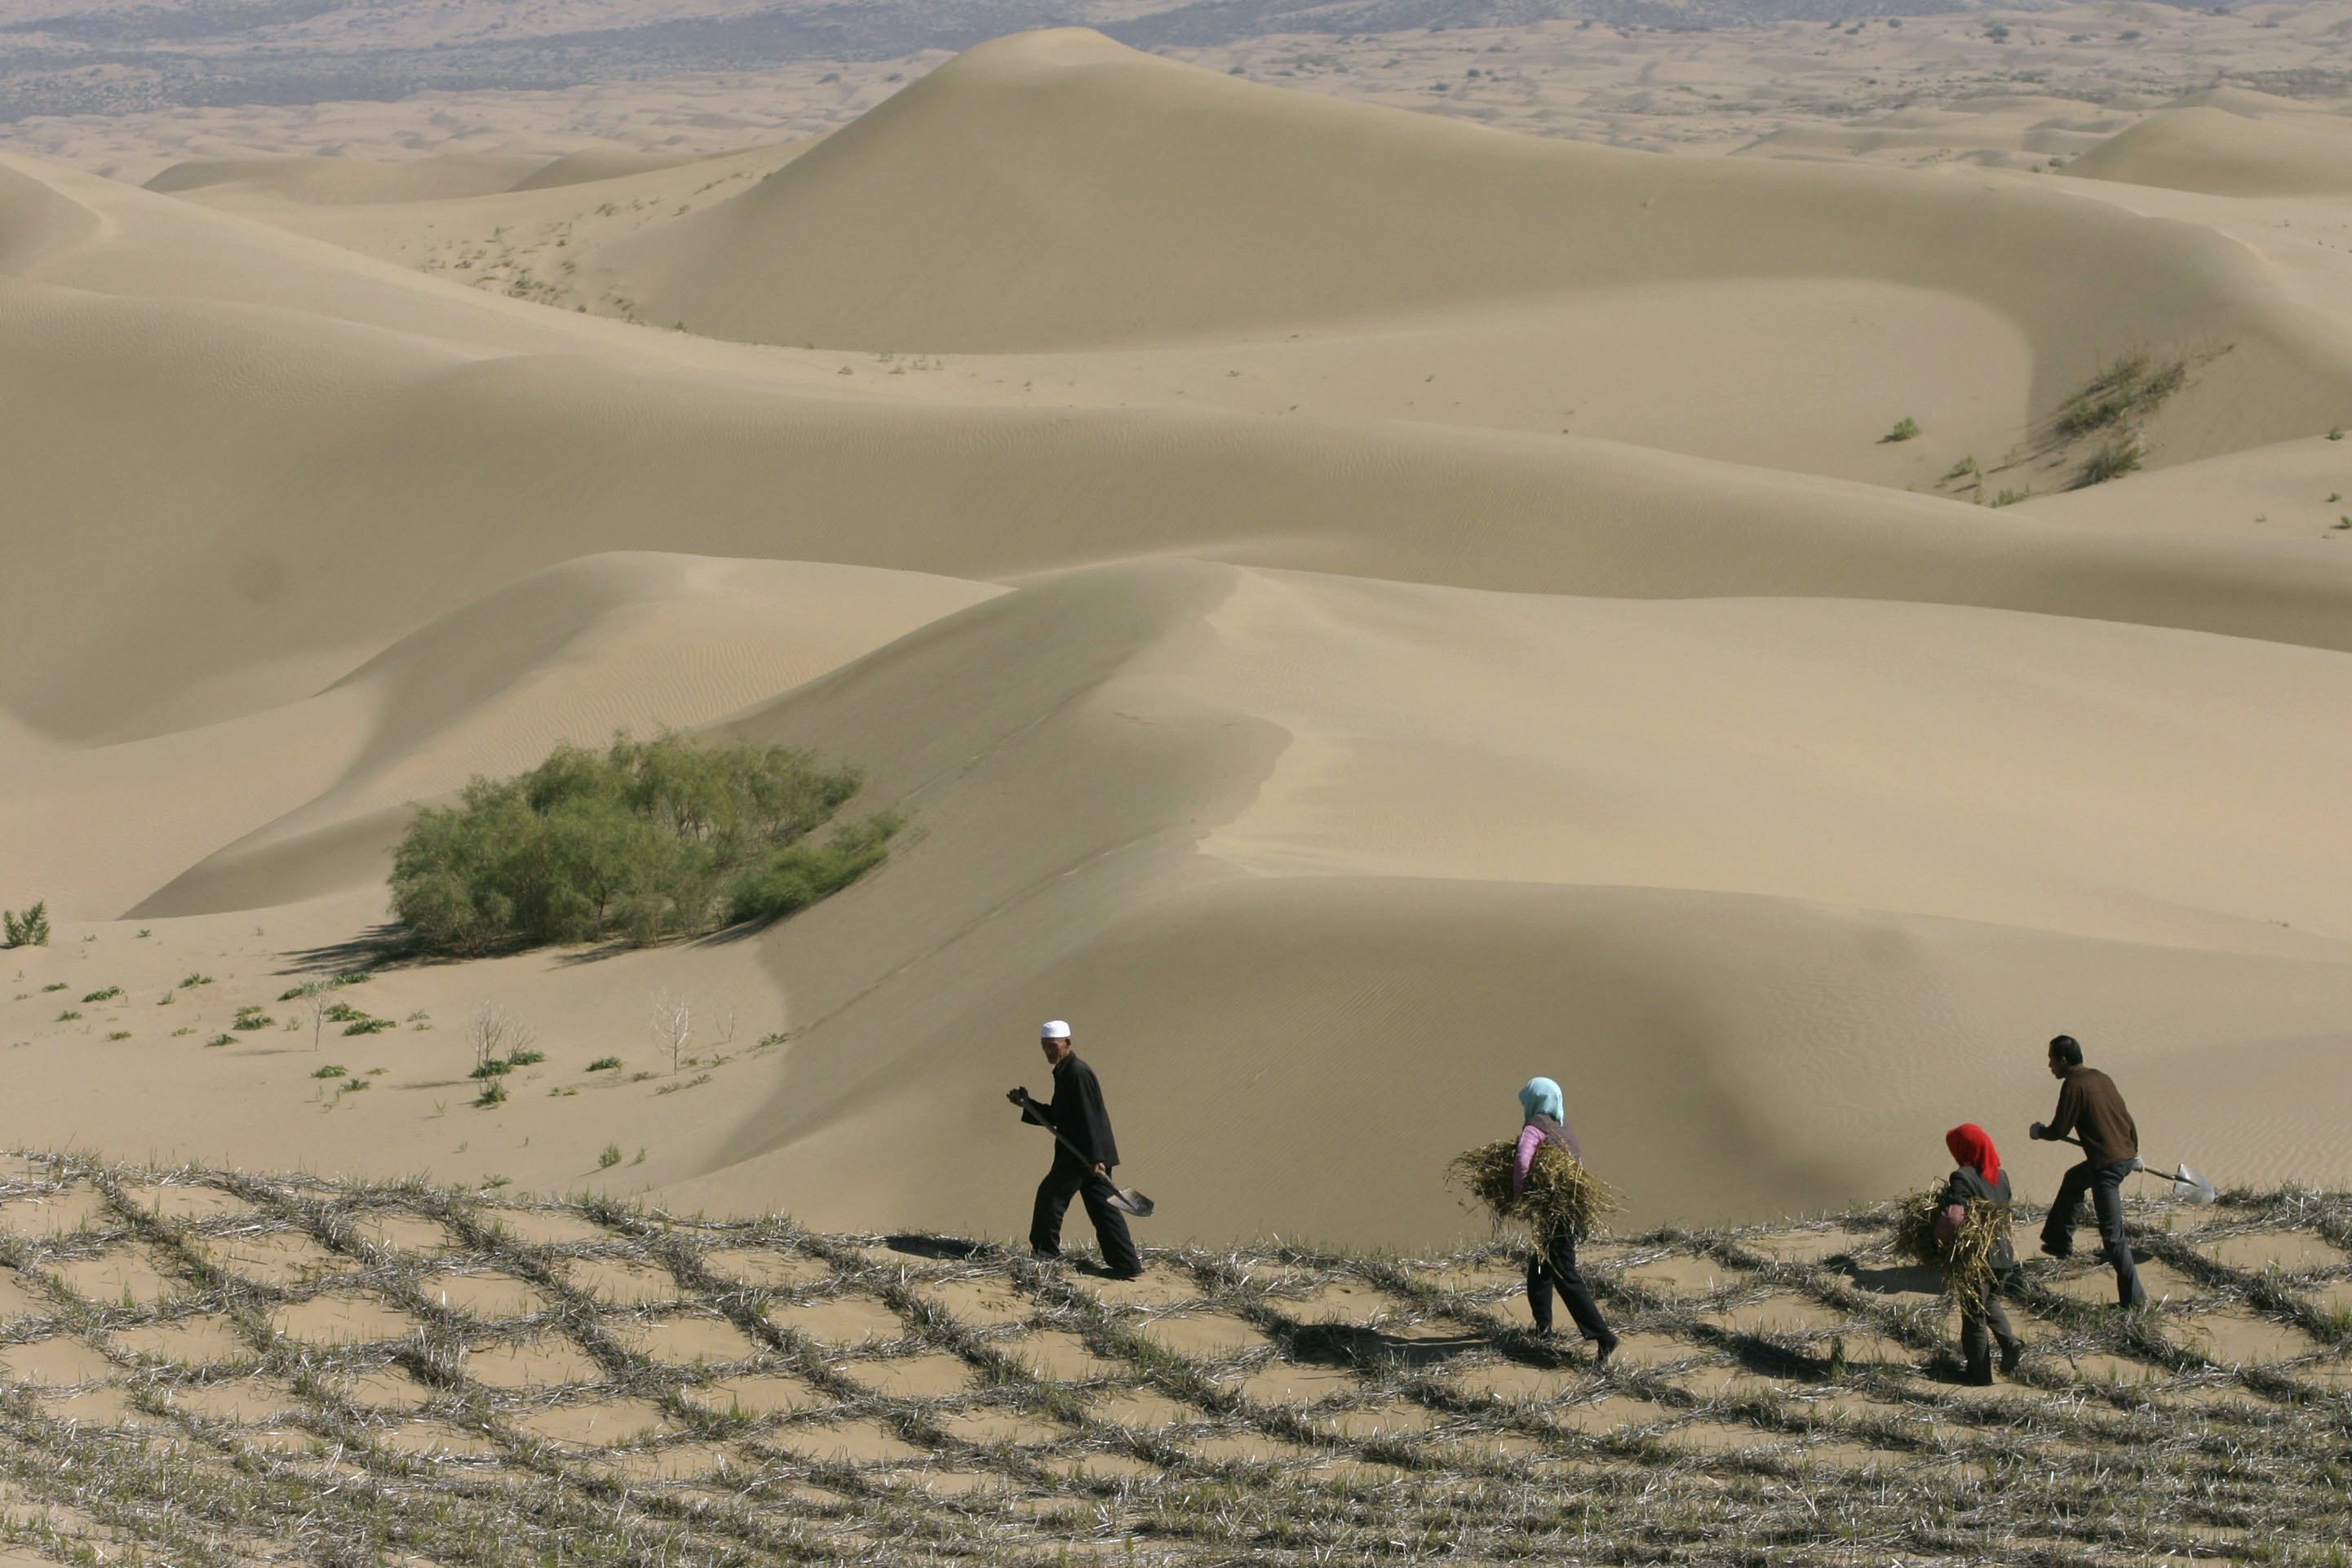 China is quickly turning into a desert, and it's causing problems